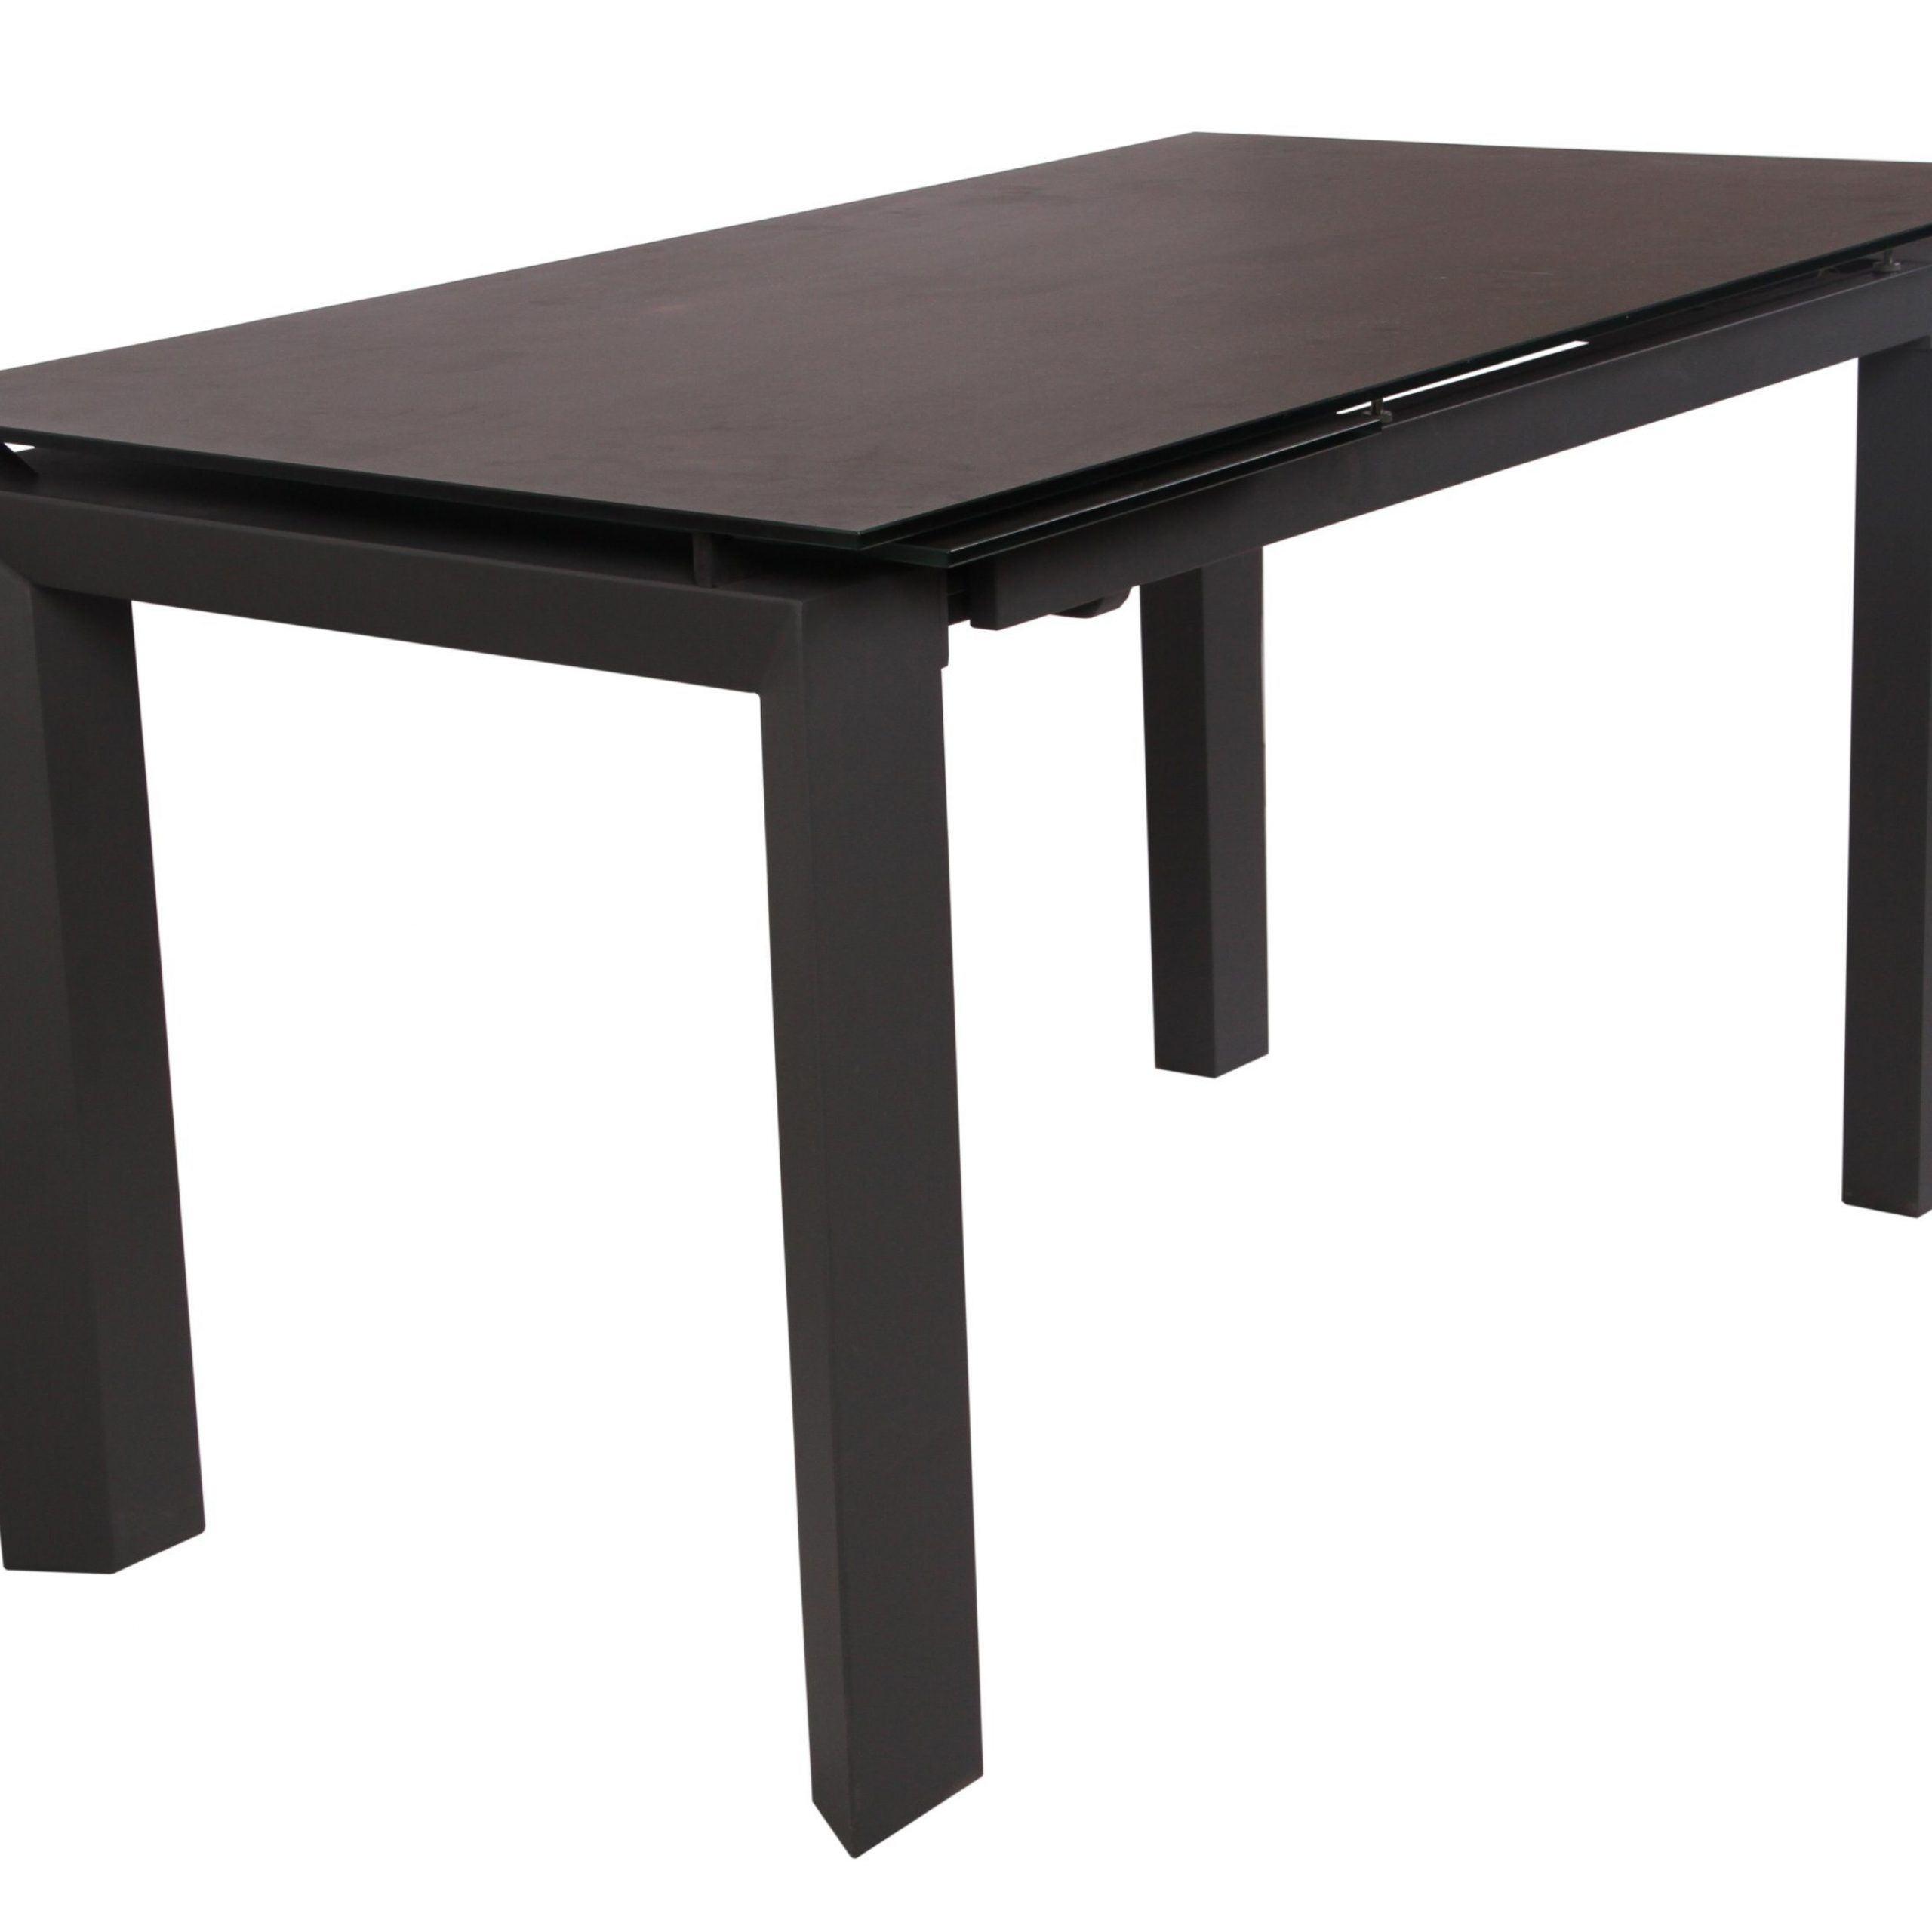 [%[hot Item] 10 15mm High Quality Iron Tempered Glass Dining Table Top With  Metal Leg Inside Favorite Glass Dining Tables With Metal Legs|glass Dining Tables With Metal Legs Pertaining To Fashionable [hot Item] 10 15mm High Quality Iron Tempered Glass Dining Table Top With  Metal Leg|recent Glass Dining Tables With Metal Legs Throughout [hot Item] 10 15mm High Quality Iron Tempered Glass Dining Table Top With  Metal Leg|latest [hot Item] 10 15mm High Quality Iron Tempered Glass Dining Table Top With  Metal Leg With Regard To Glass Dining Tables With Metal Legs%] (View 29 of 30)